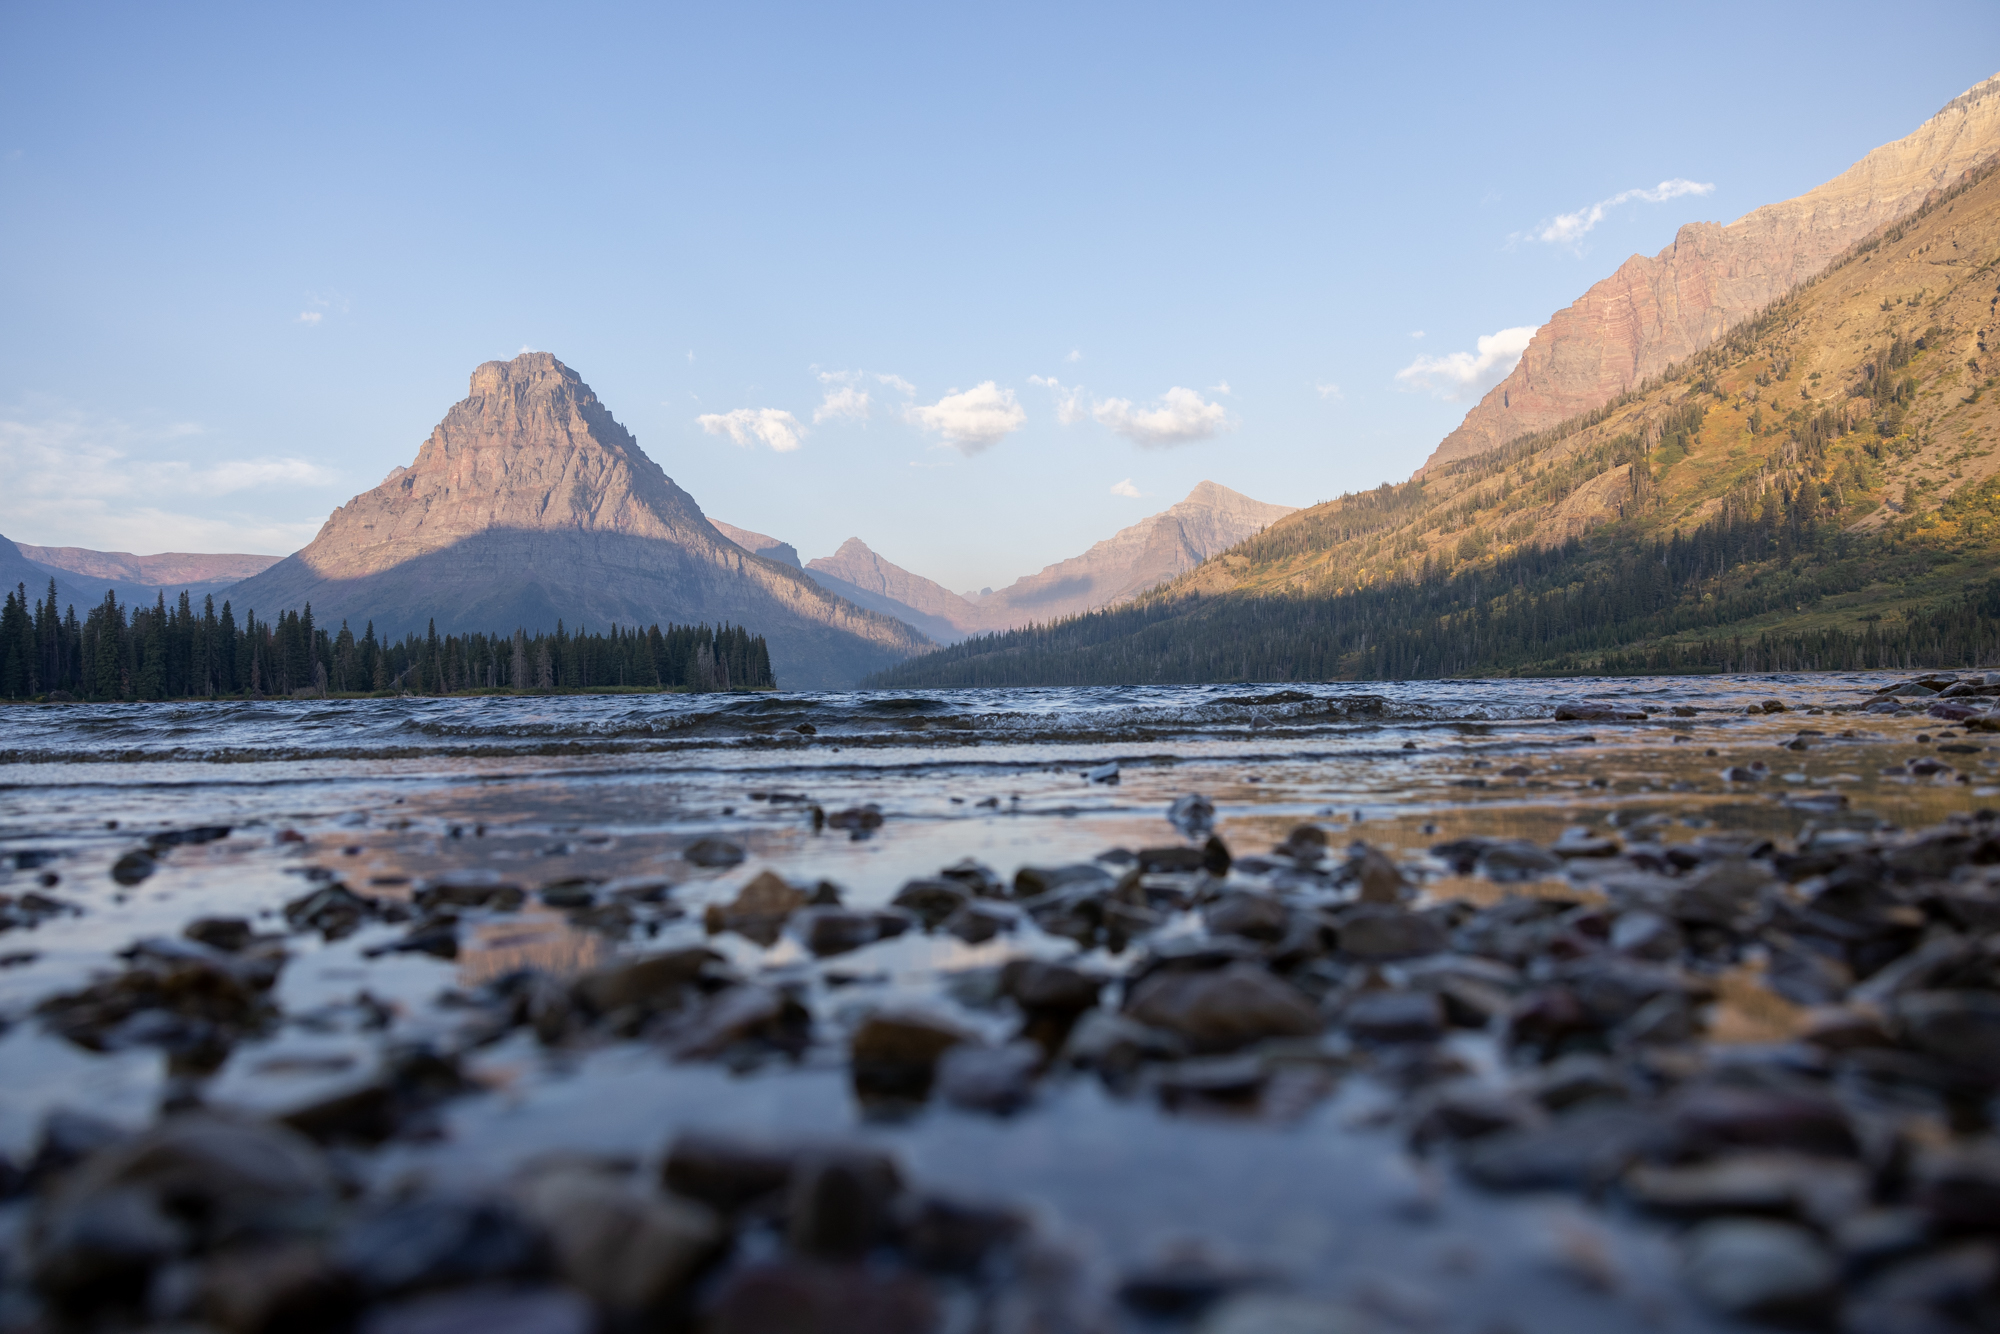 A beautiful mountain landscape view in Glacier National Park.